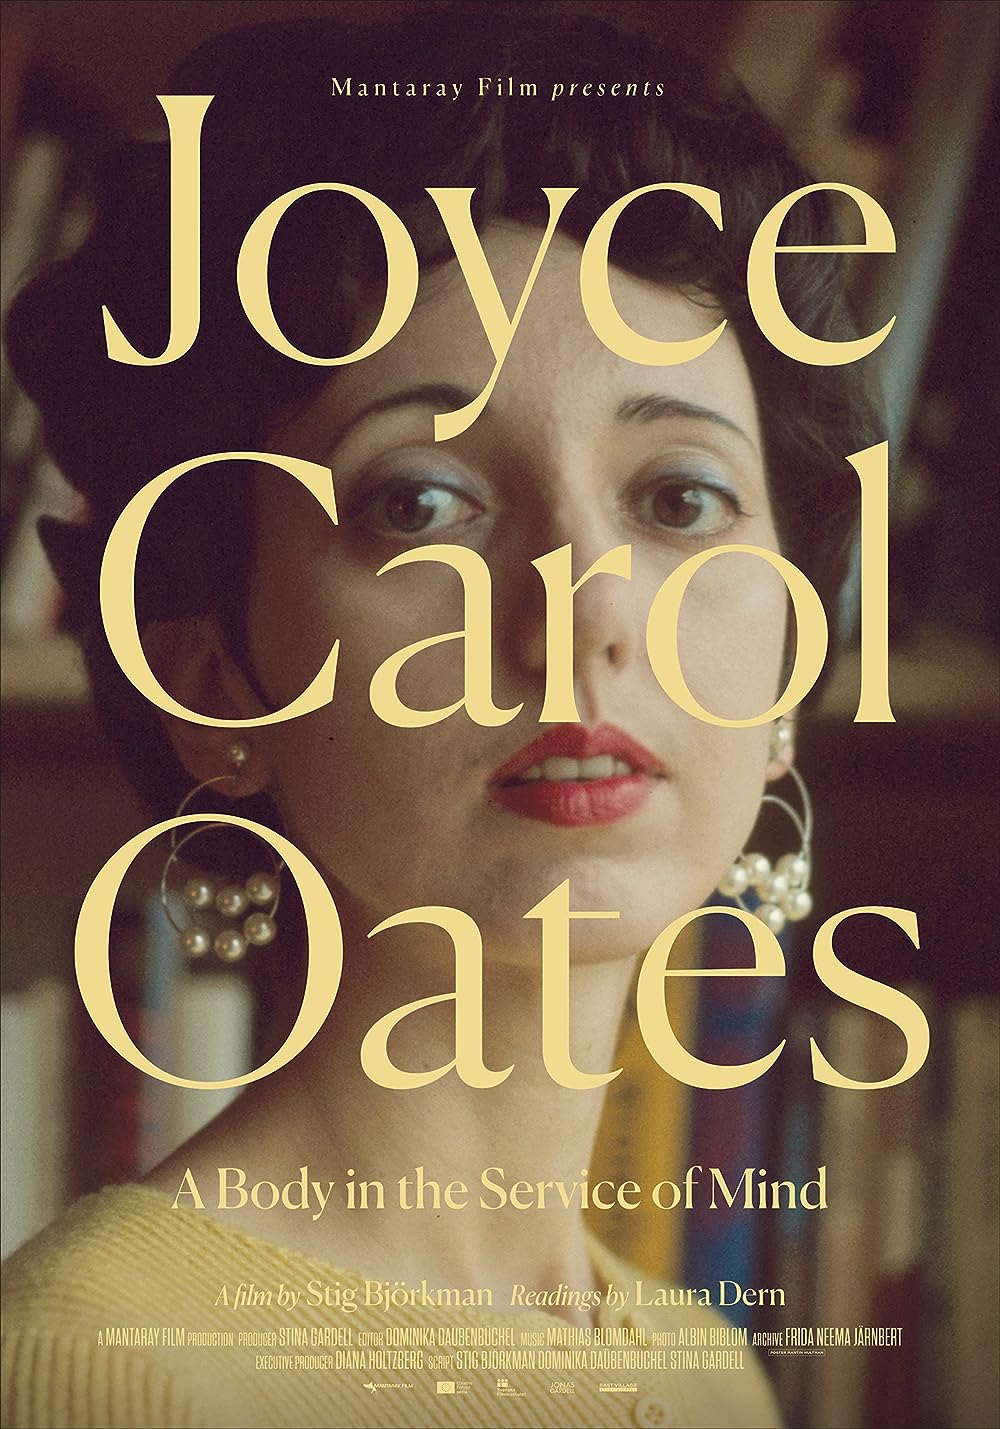 Joyce Carol Oates A Body in the Service of MindMovies 2023, Official Trailer